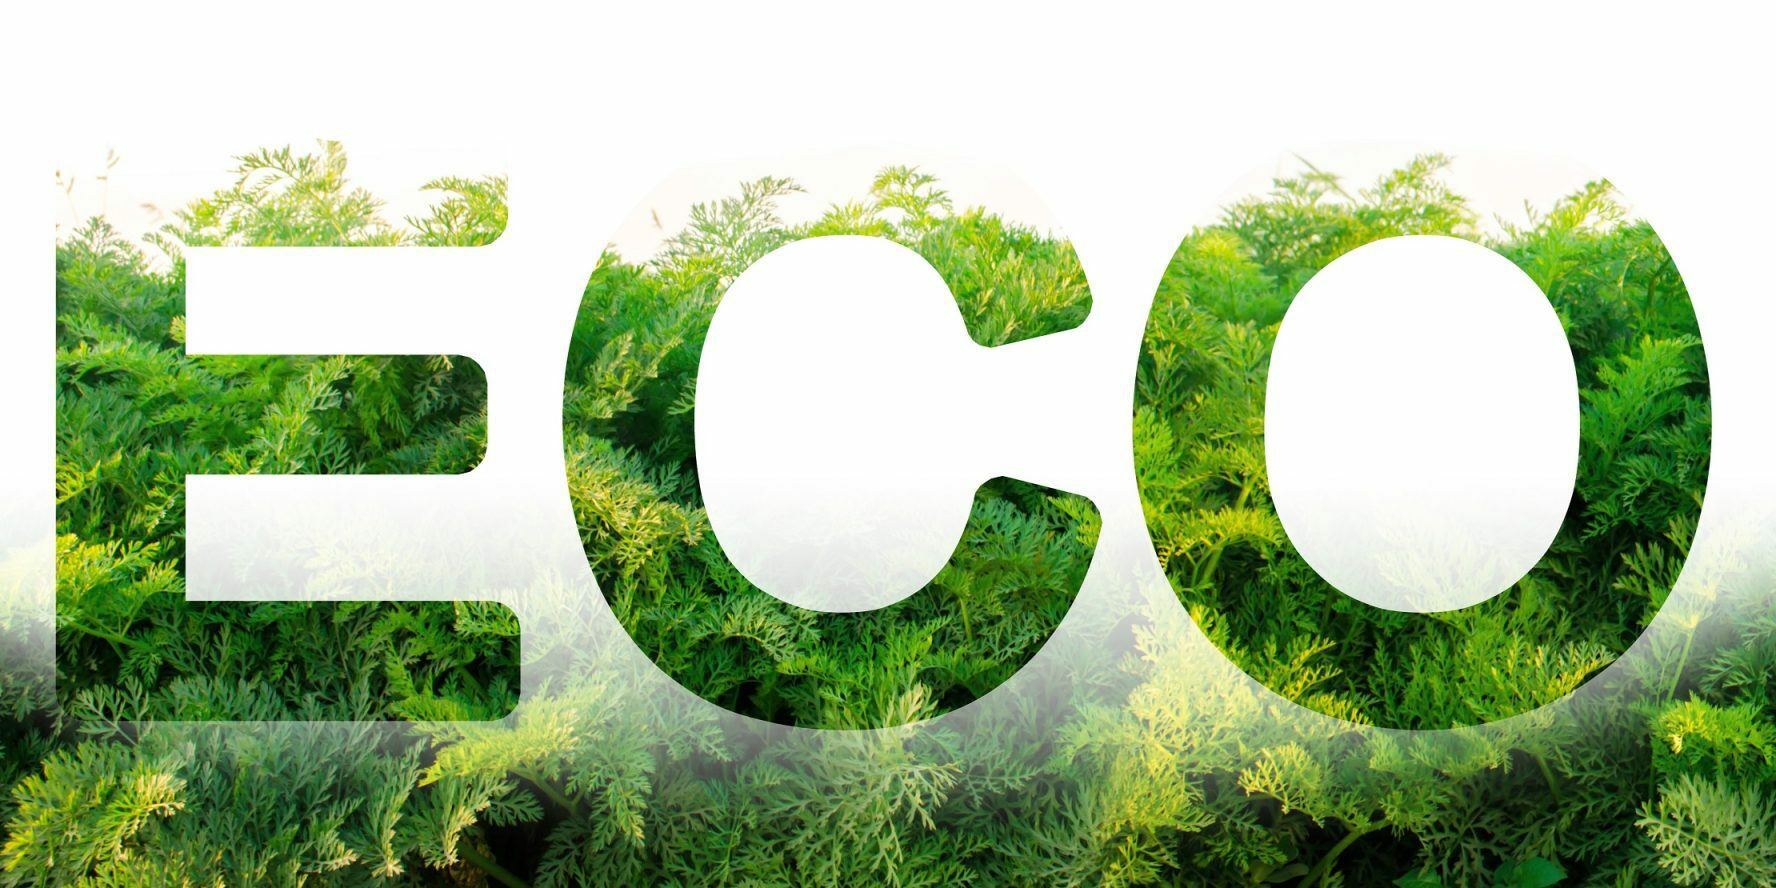 Eco word on the background of green leaves of carrots. plantation. Agriculture. harvest. Environmentally friendly, climate change, quality control, use safe pesticides. Organic vegetables.